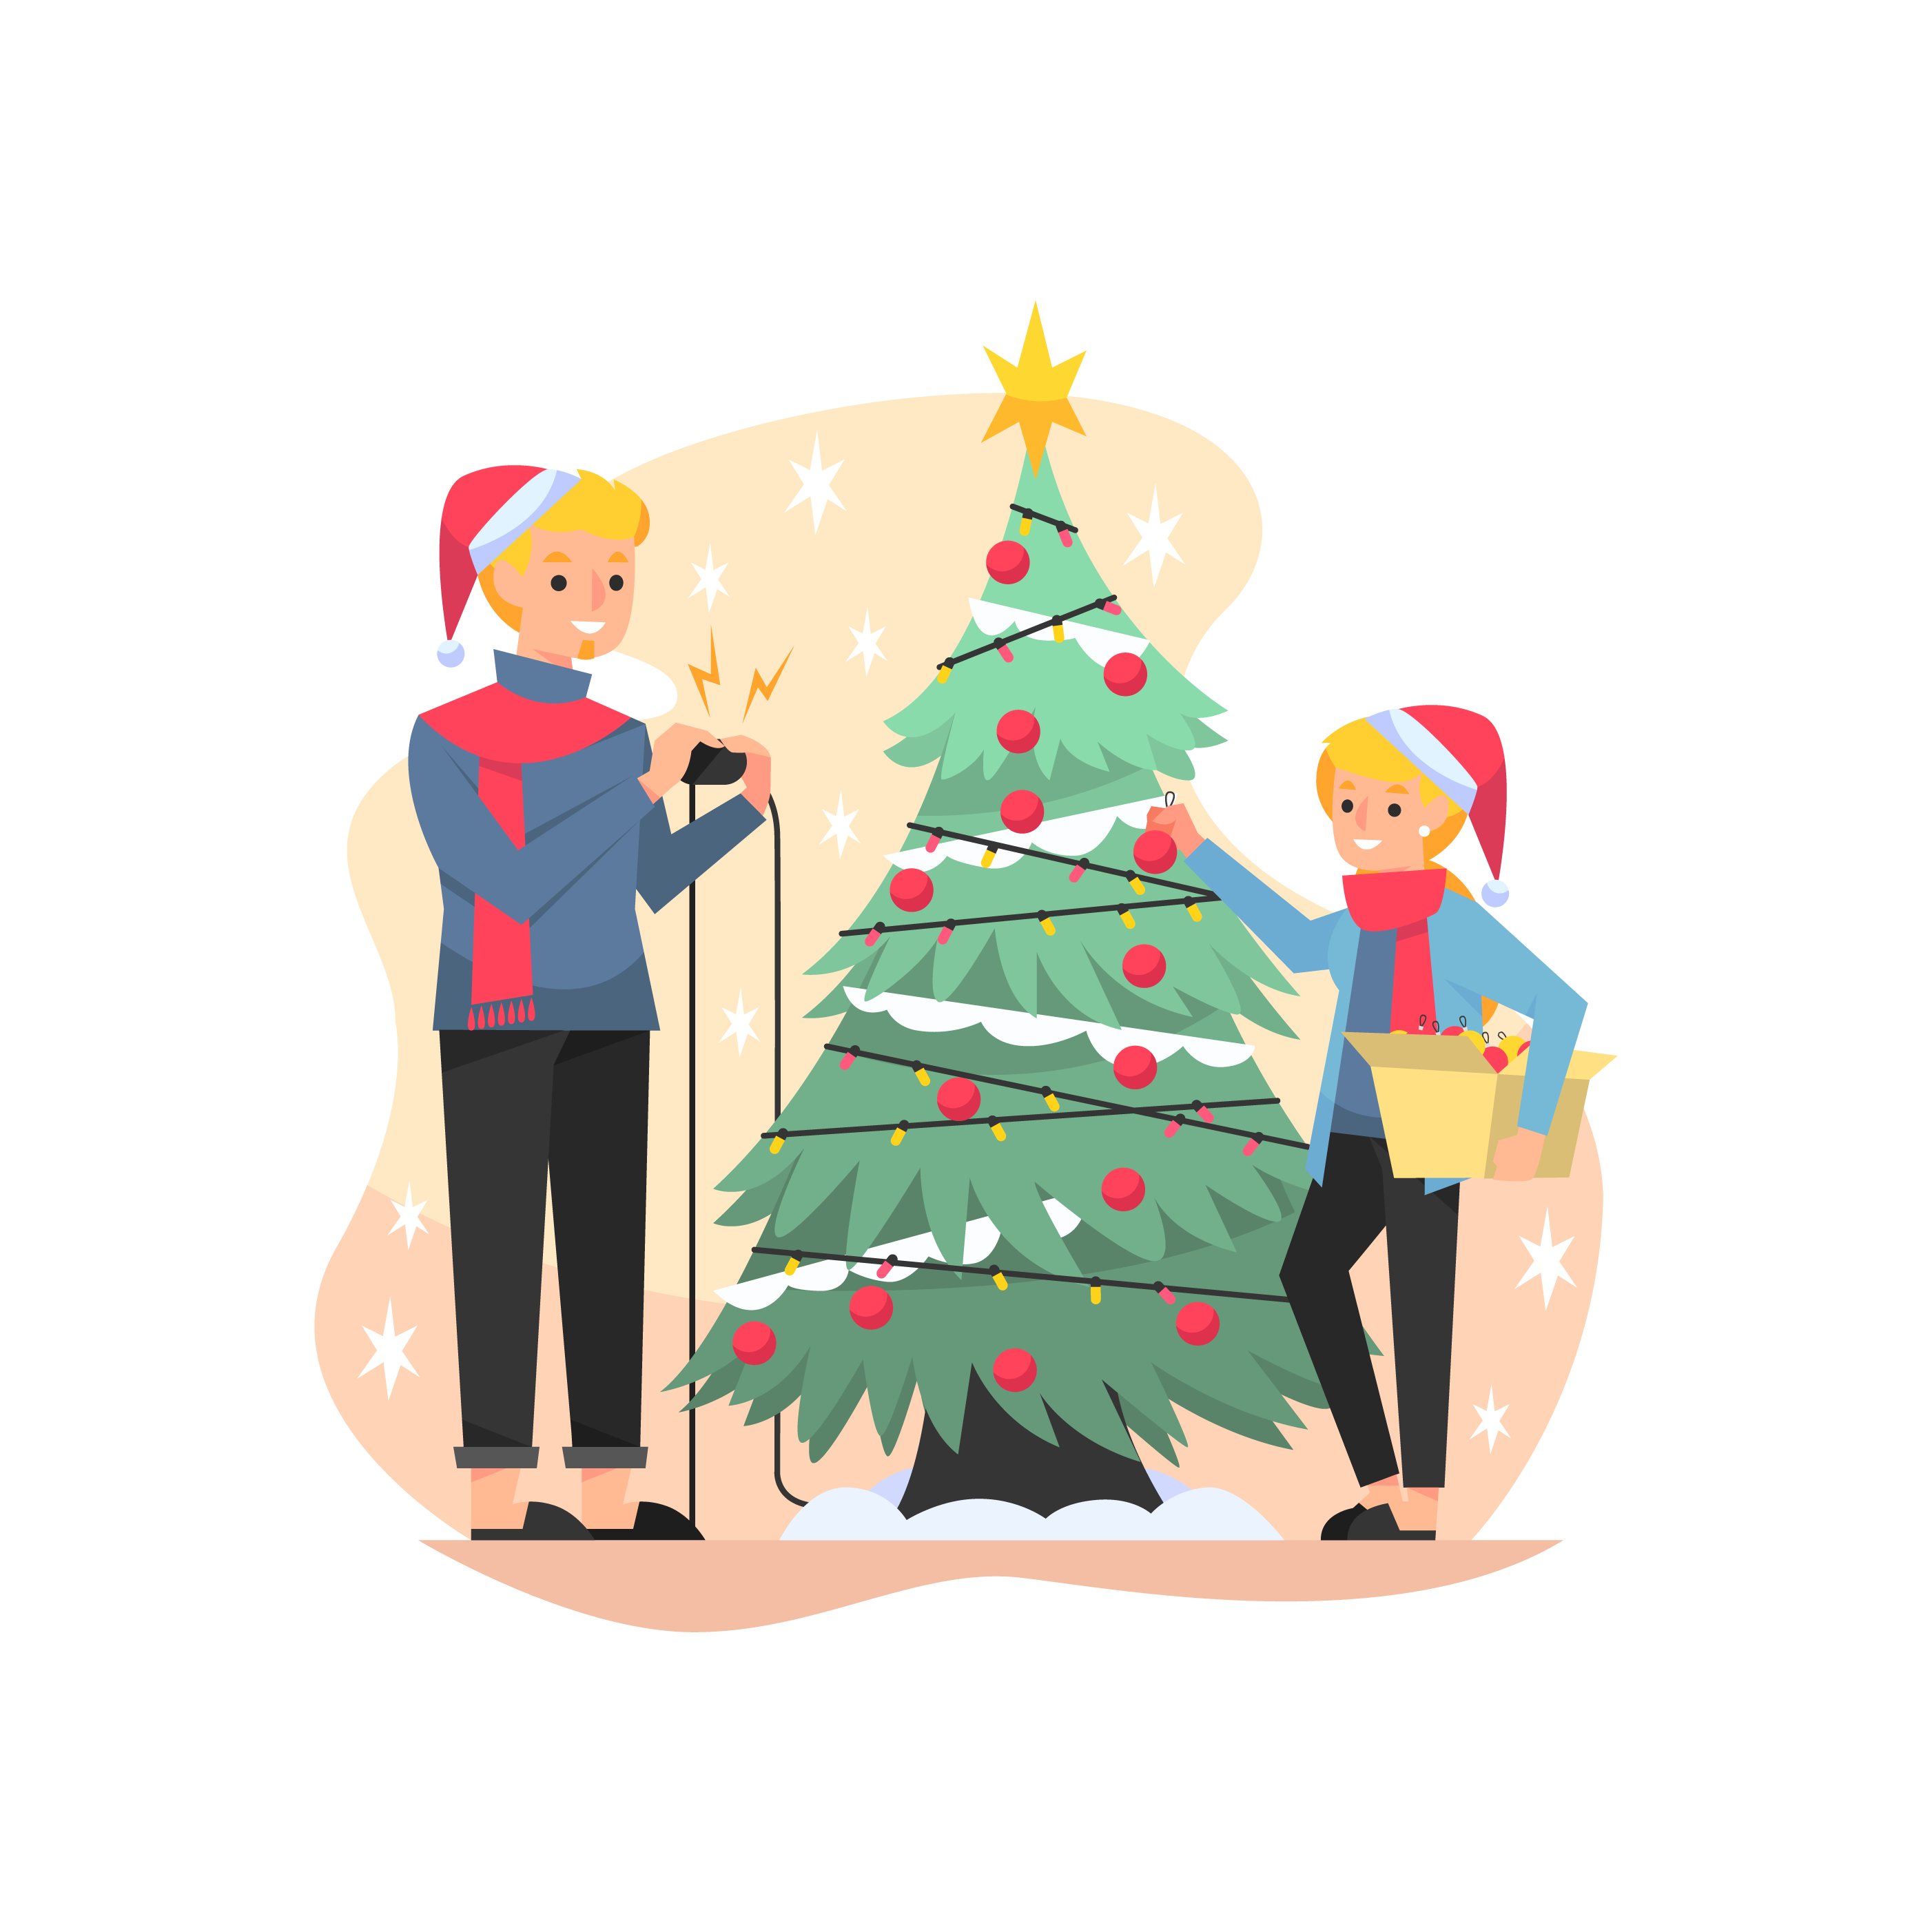 Graphic of woman and man lighting up Christmas tree with extension cord